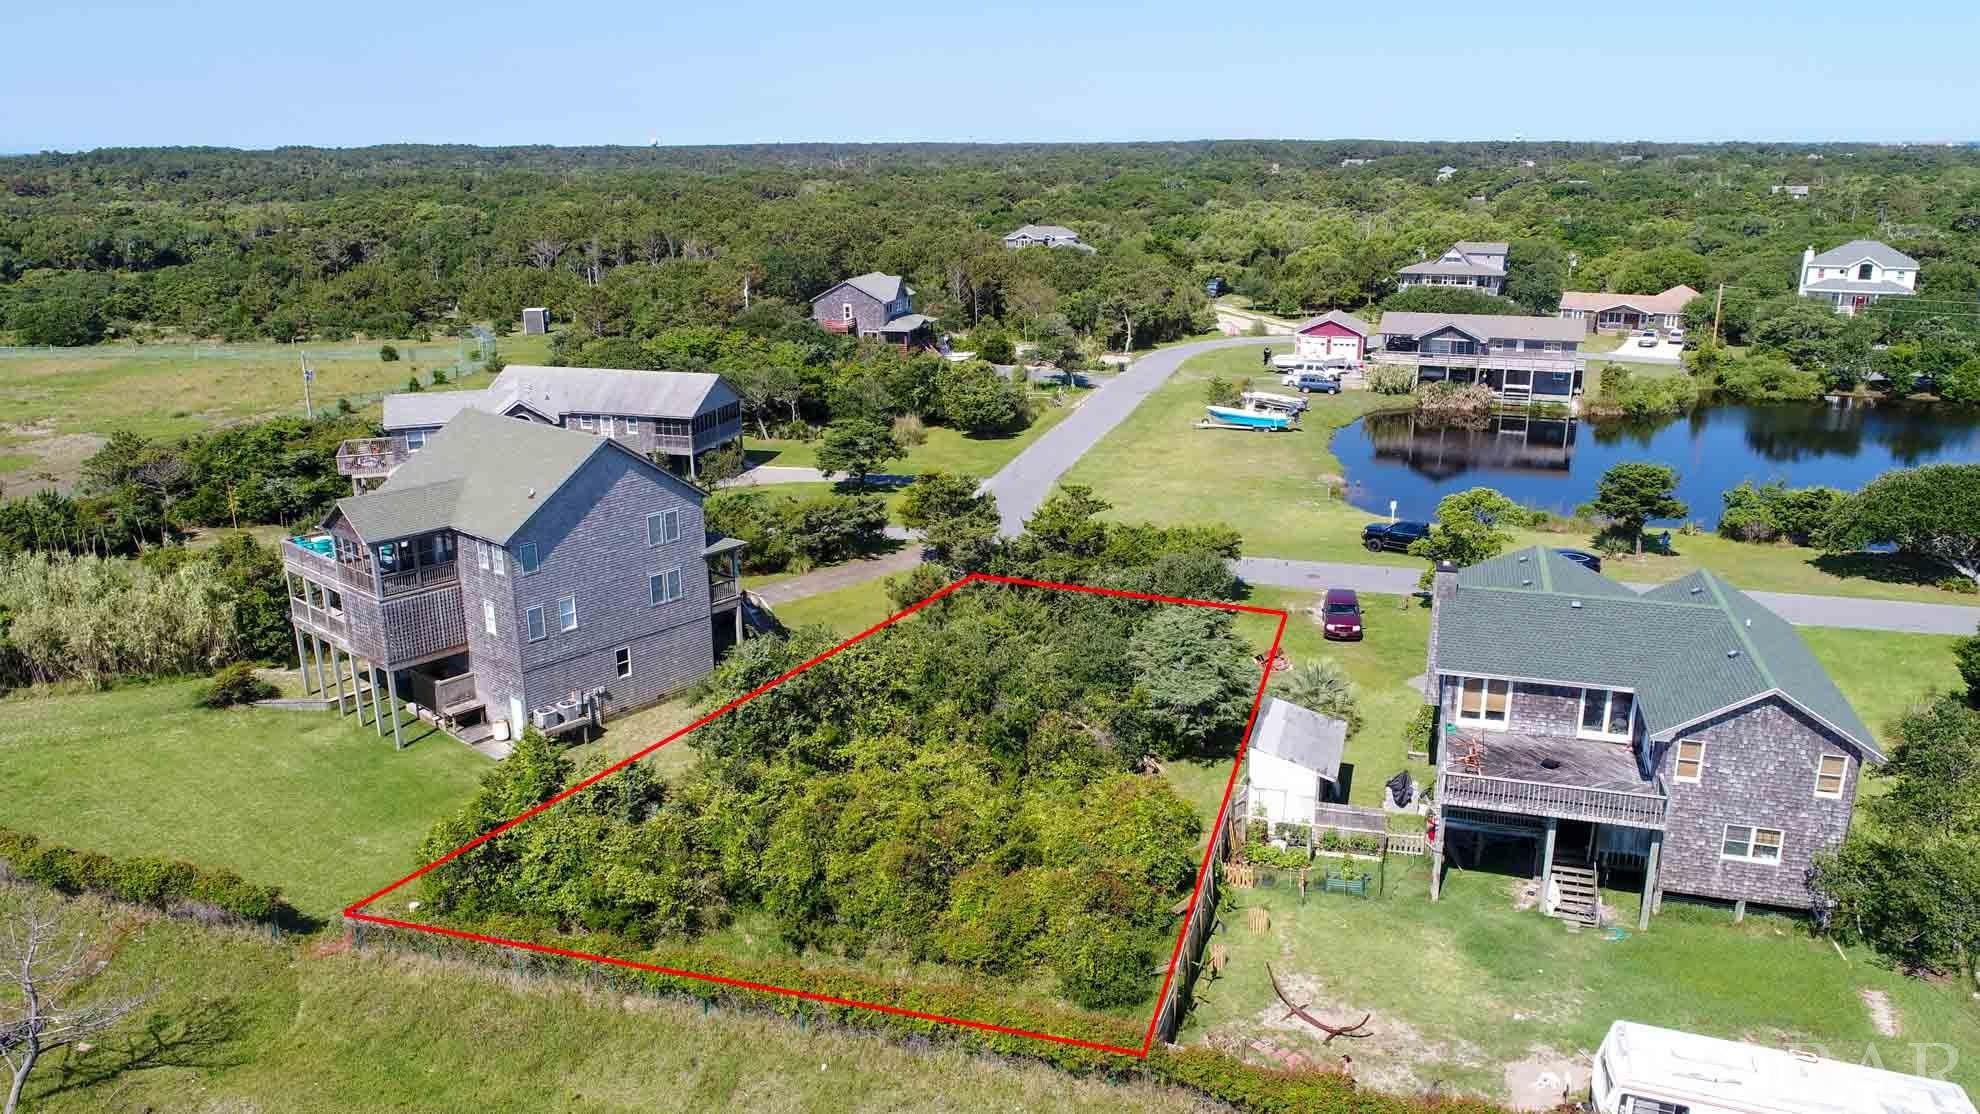 Come build your dream Buxton home in the beautiful subdivision of Diamond Point Estates. This neighborhood has a good mix of rentals, primary homes and second homes with an easy walk to the beach and a short drive to the point. A home built here may have an ocean or light house view. Come see what this lot has in store for you.